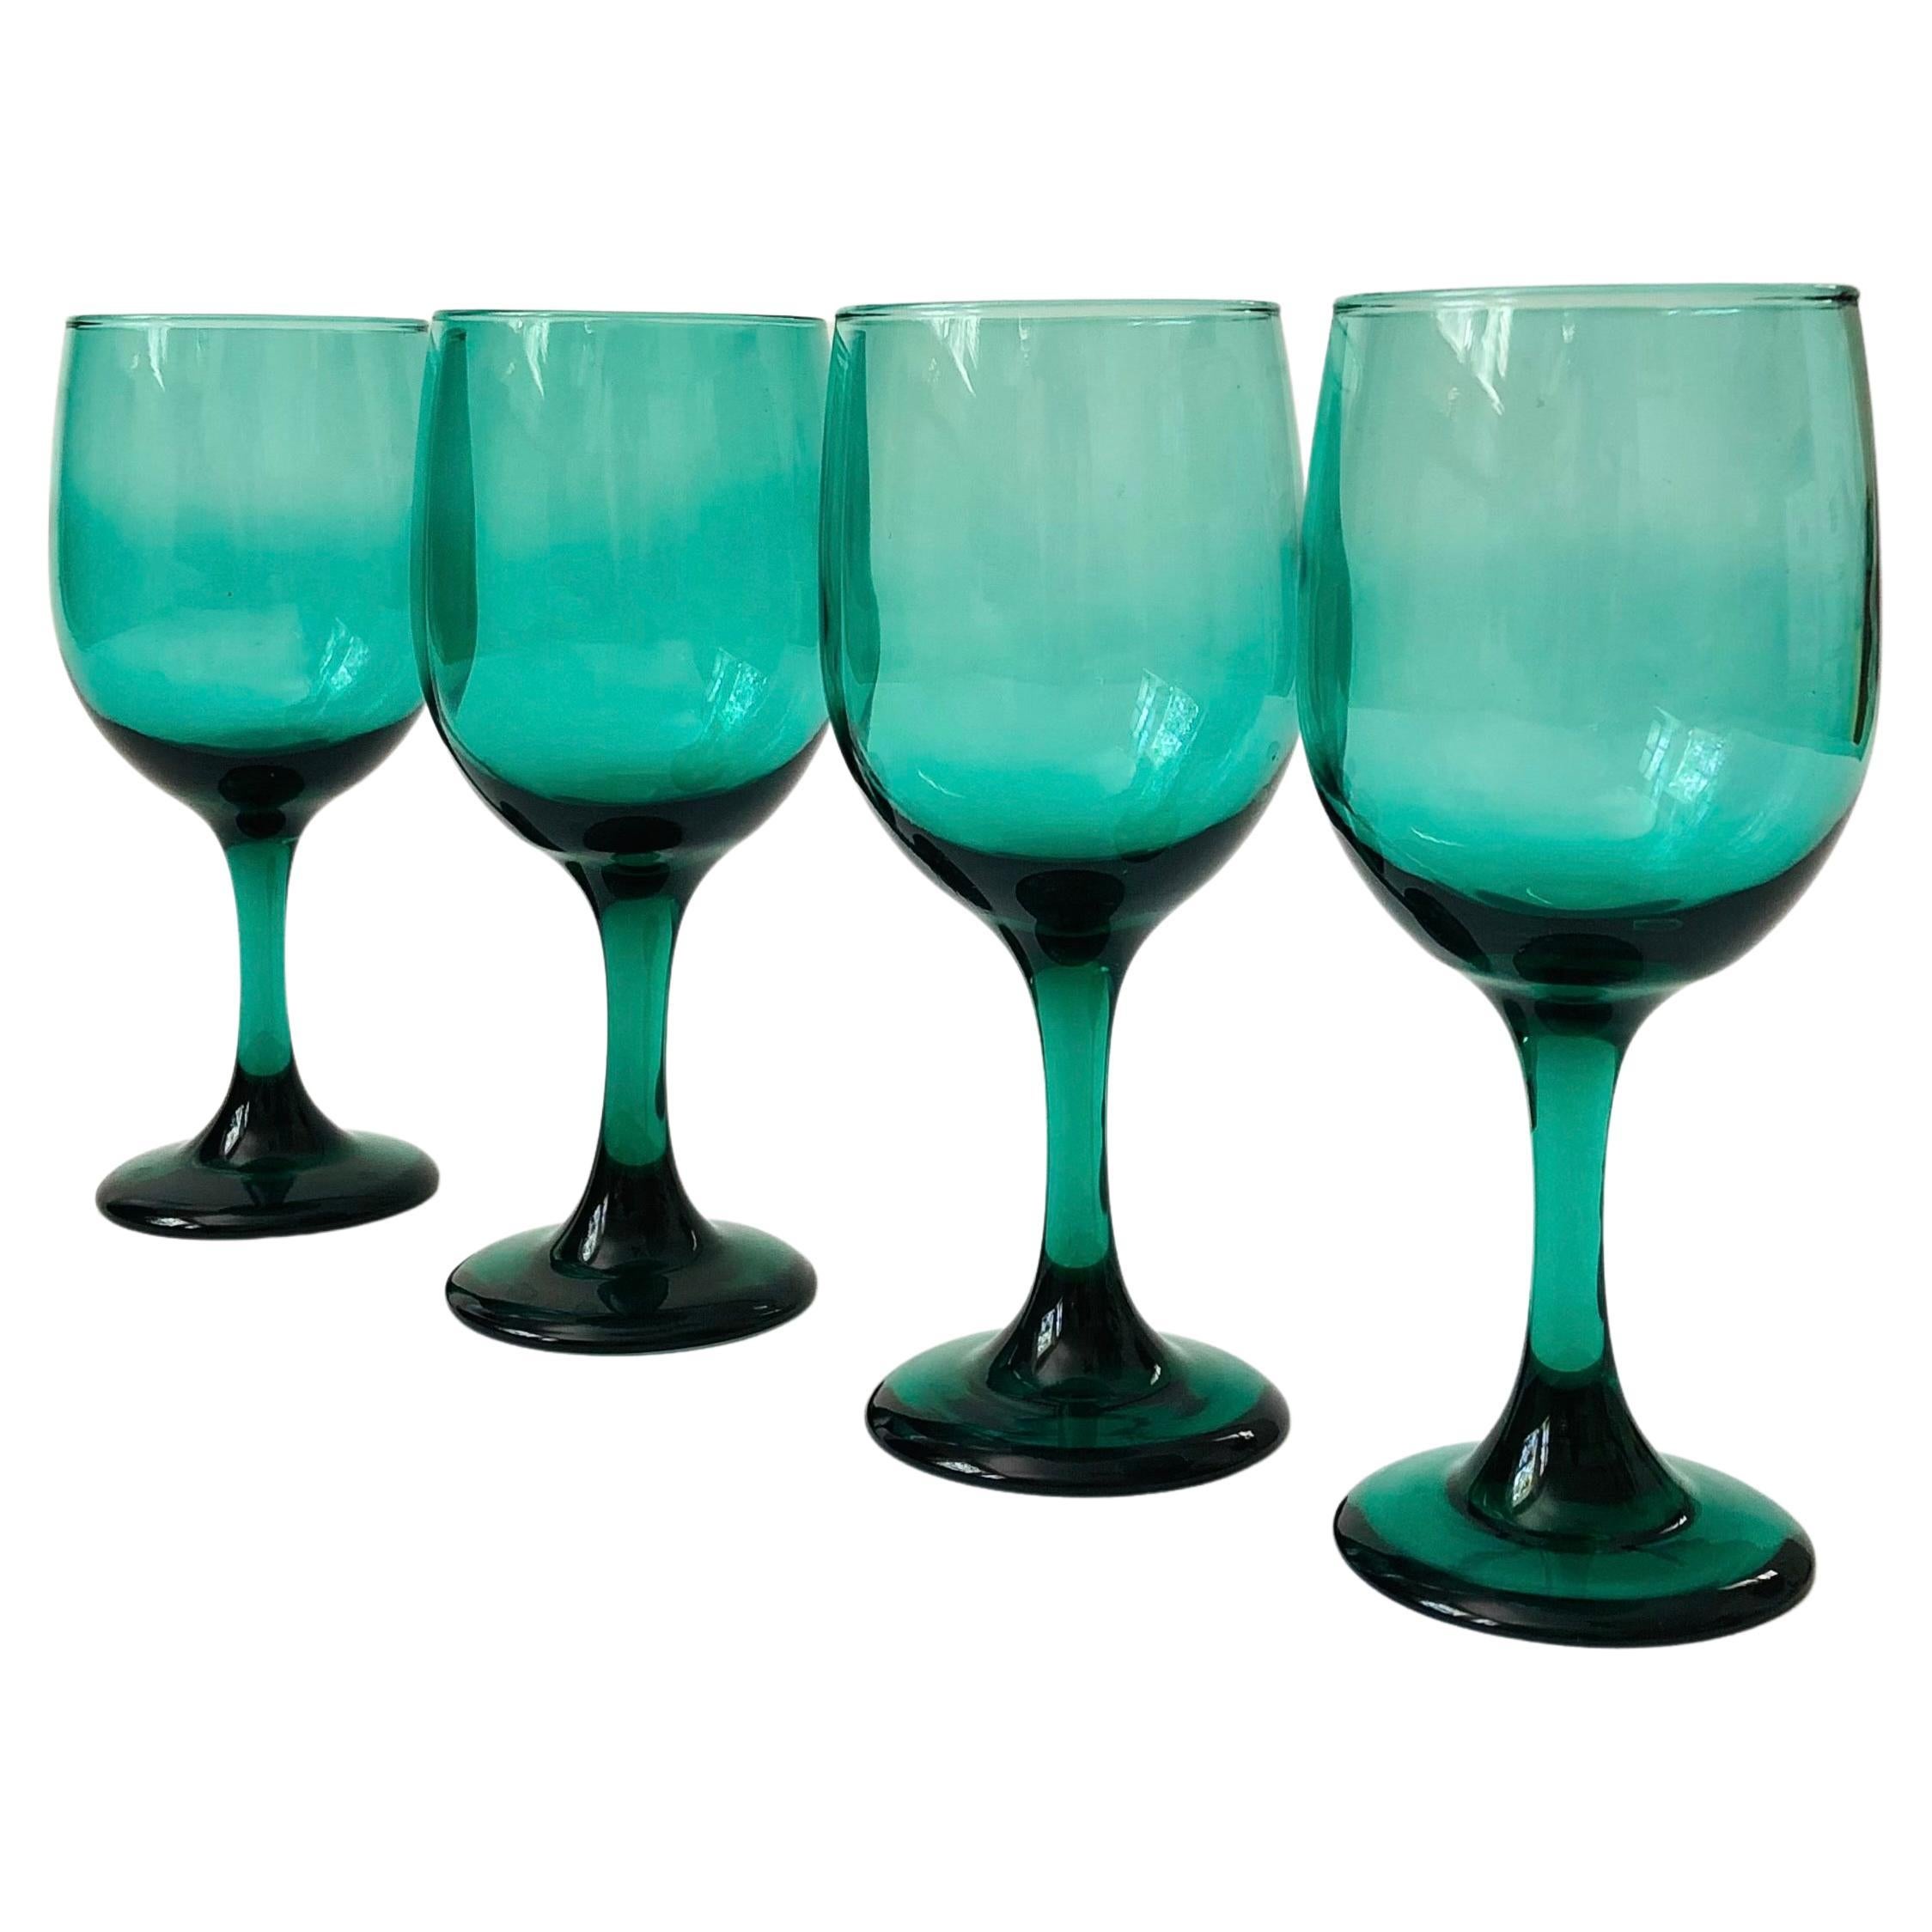 Emerald Green Wine Glasses - Set of 4 For Sale